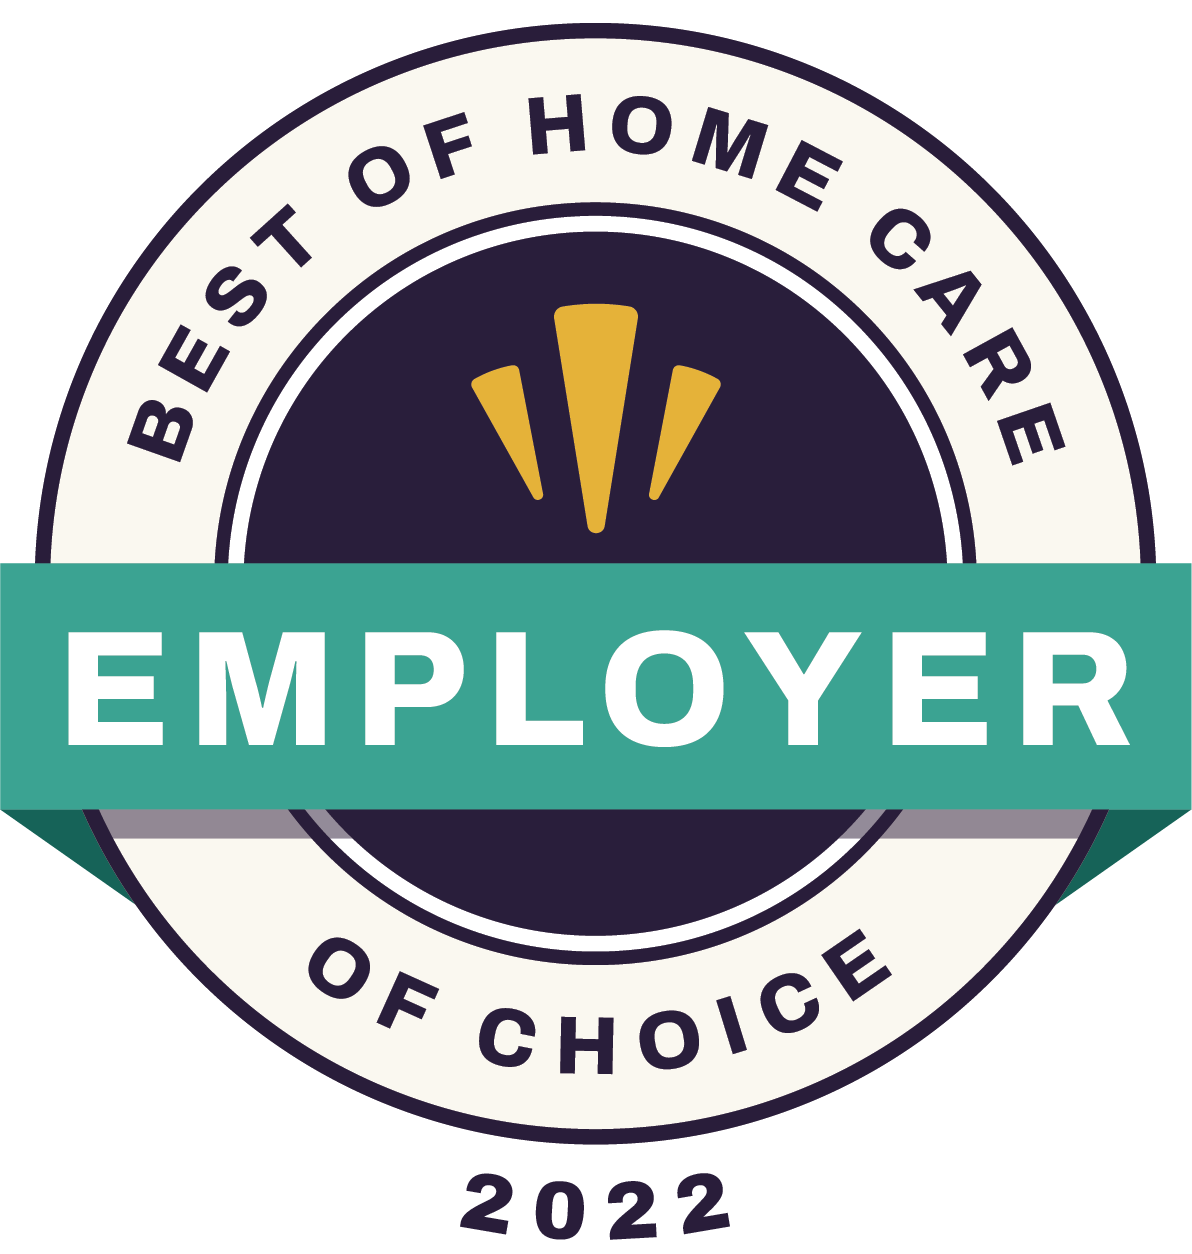 Best of home care employer of choice 2022